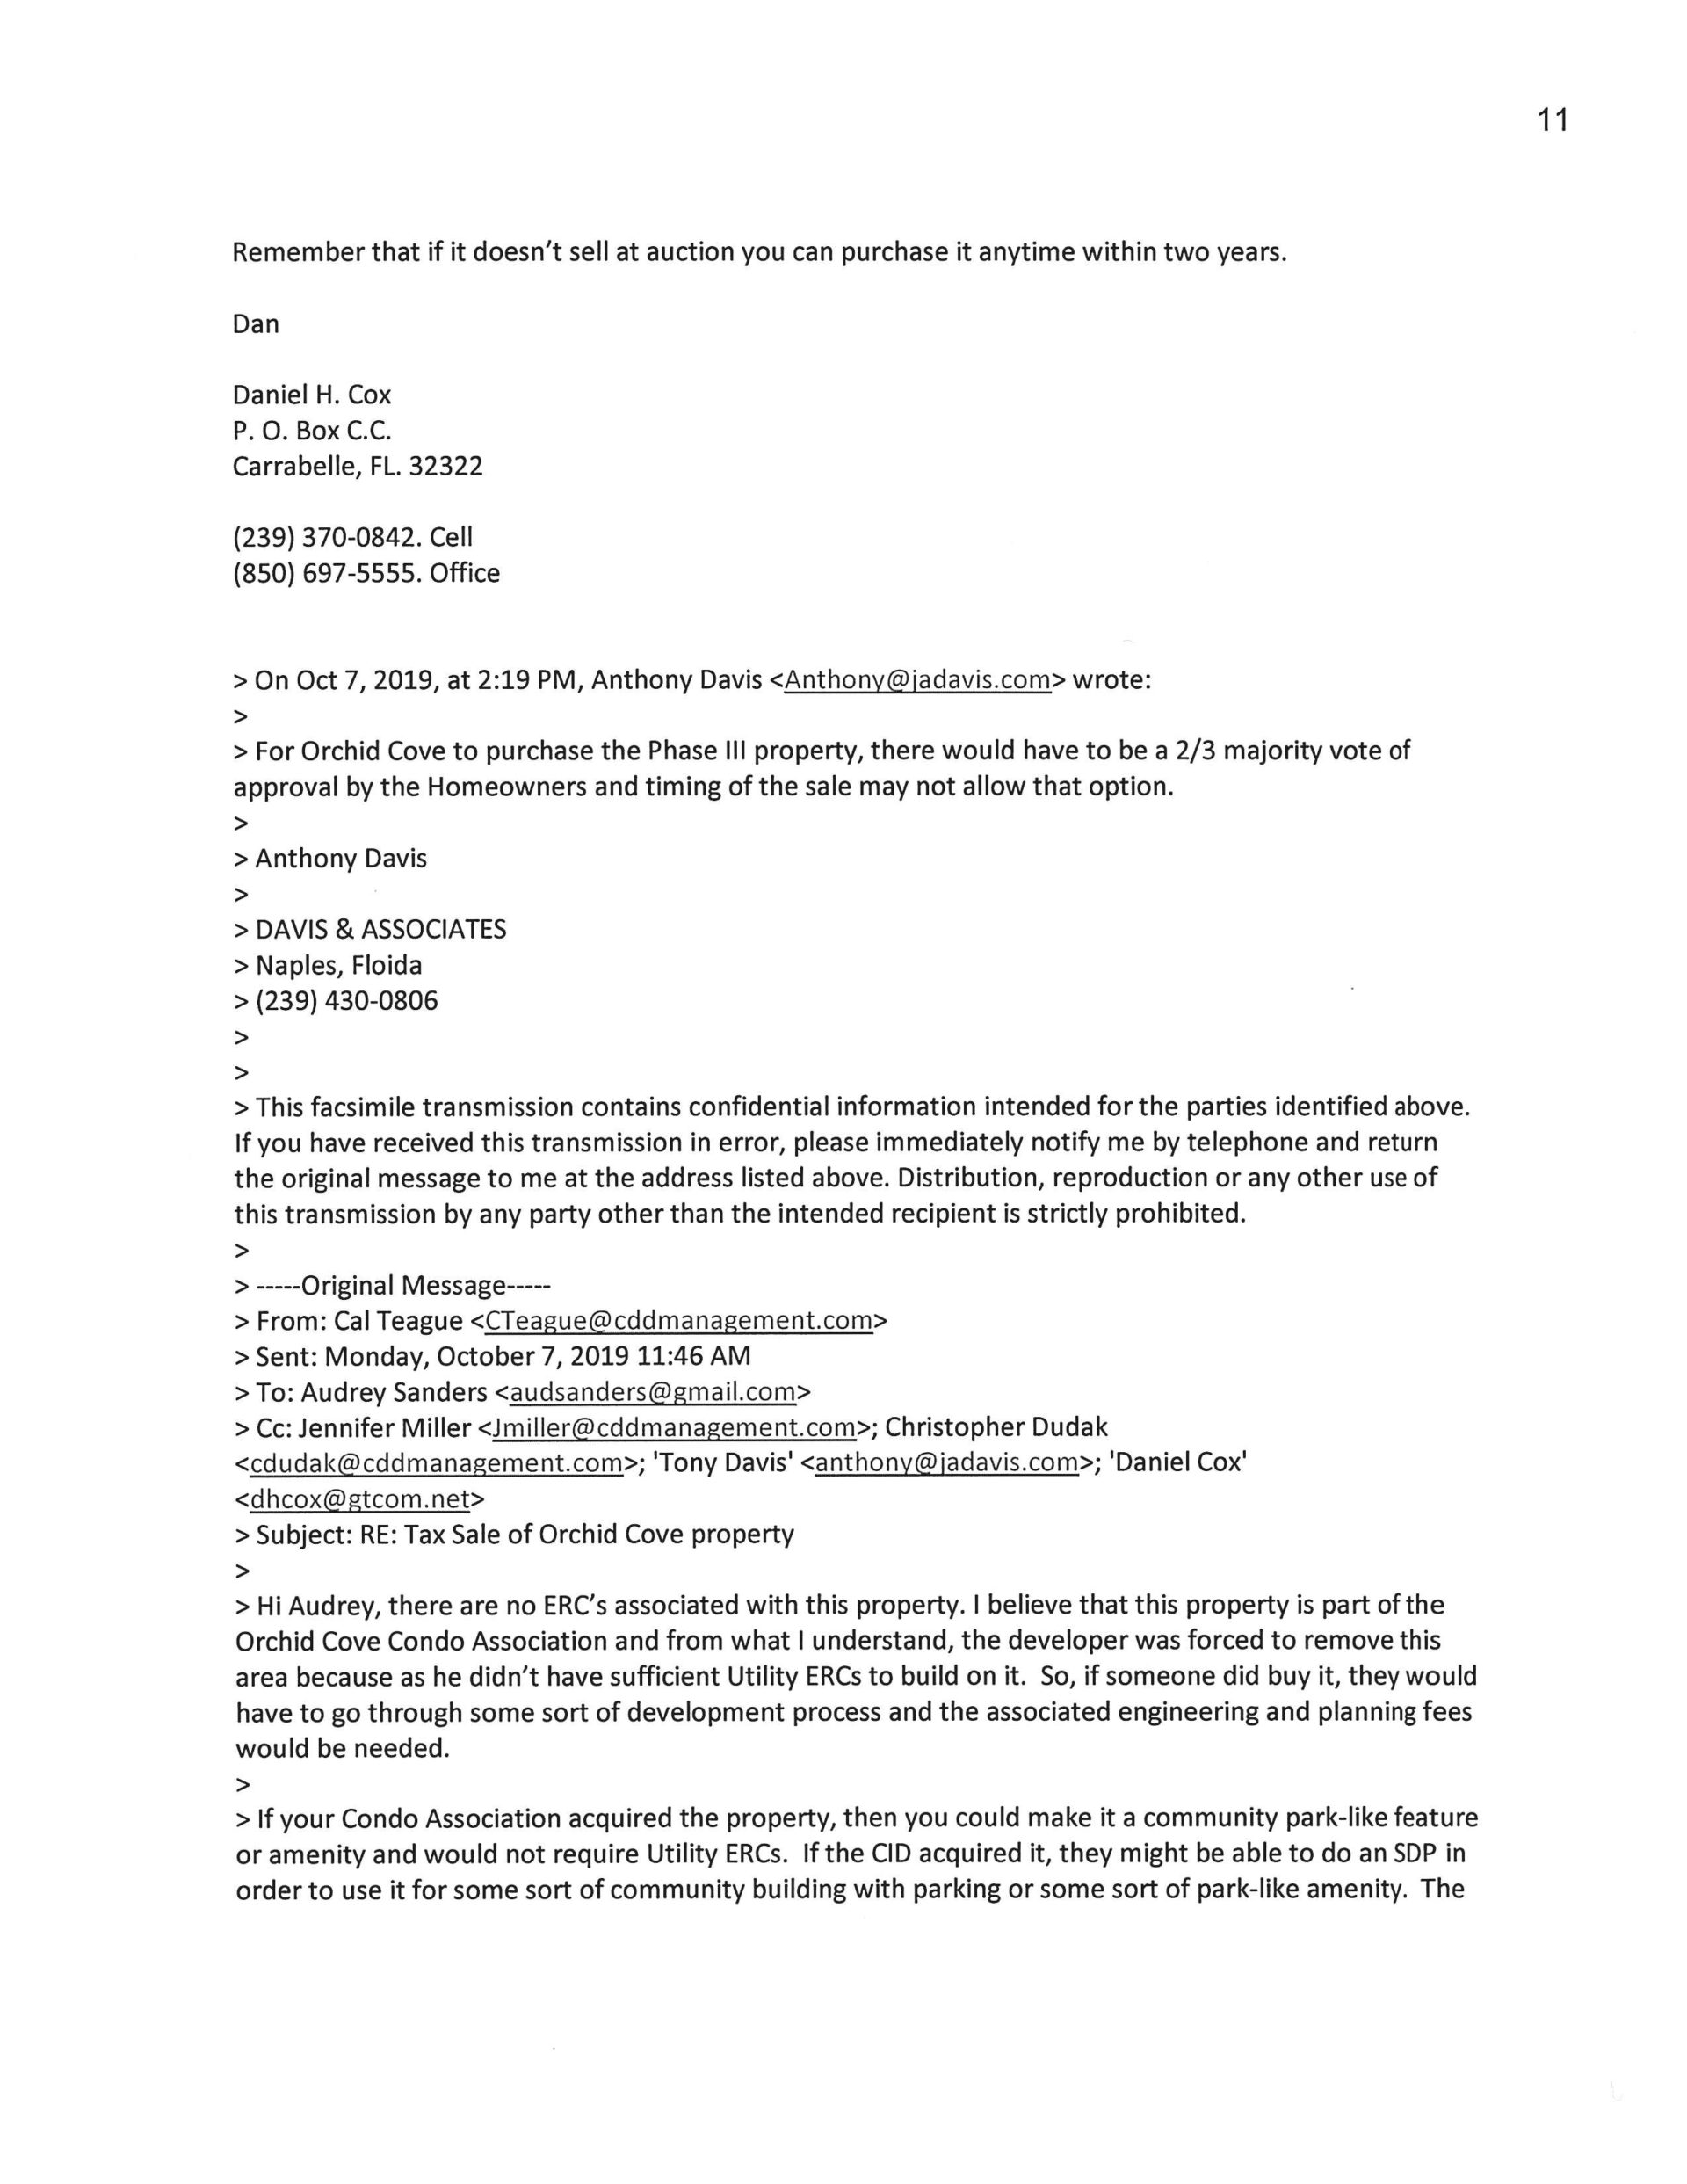 Attorney Email Tax Sale Orchid Cove 10-2019 Page 1